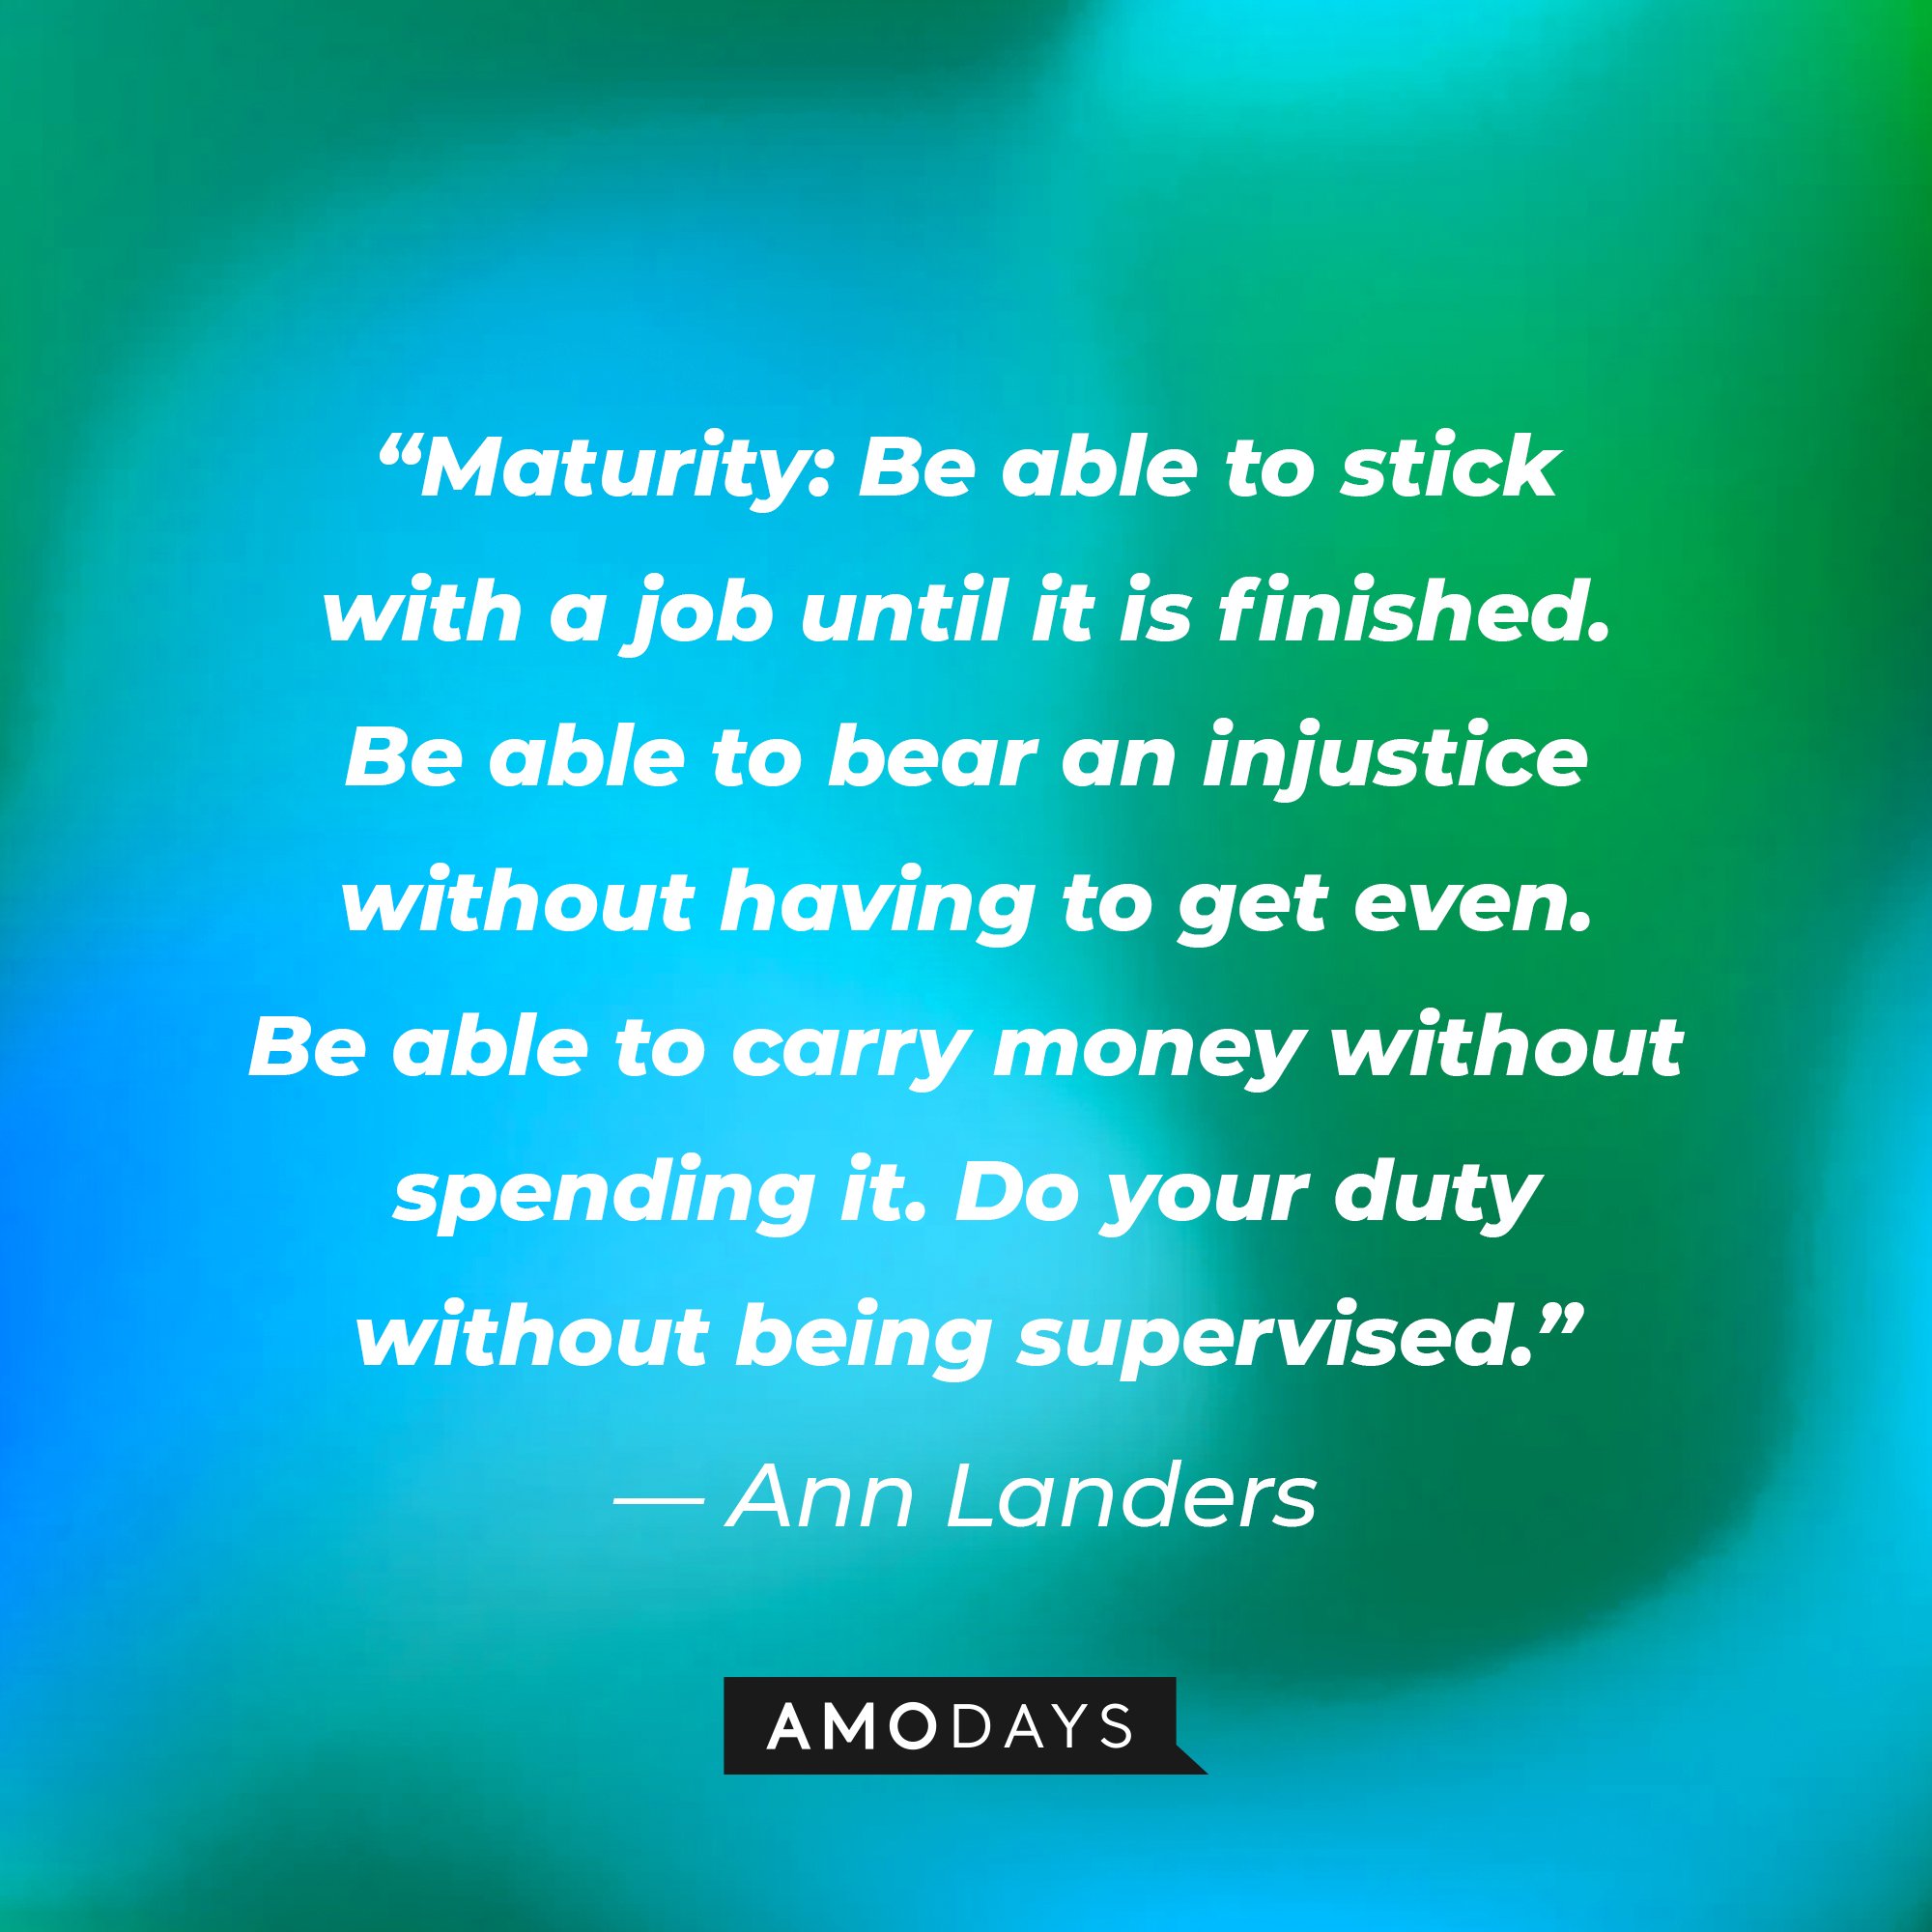  Ann Landers's quote: “Maturity: Be able to stick with a job until it is finished. Be able to bear an injustice without having to get even. Be able to carry money without spending it. Do your duty without being supervised.” | Image: AmoDays